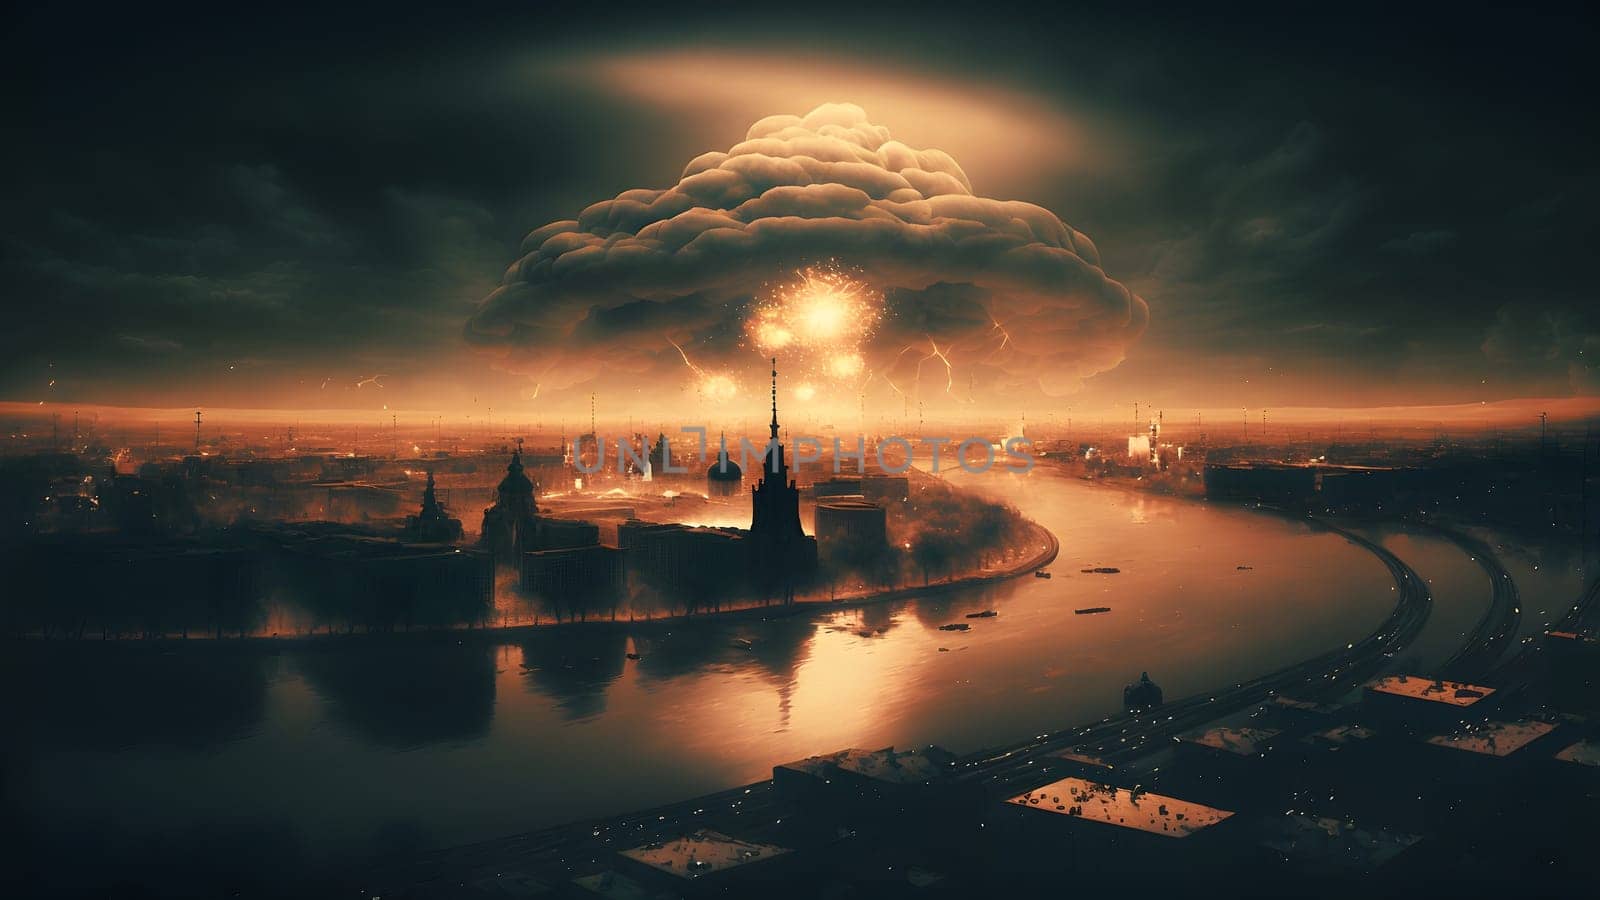 nuclear explosion mushroom cloud over russian city at morning, neural network generated art by z1b